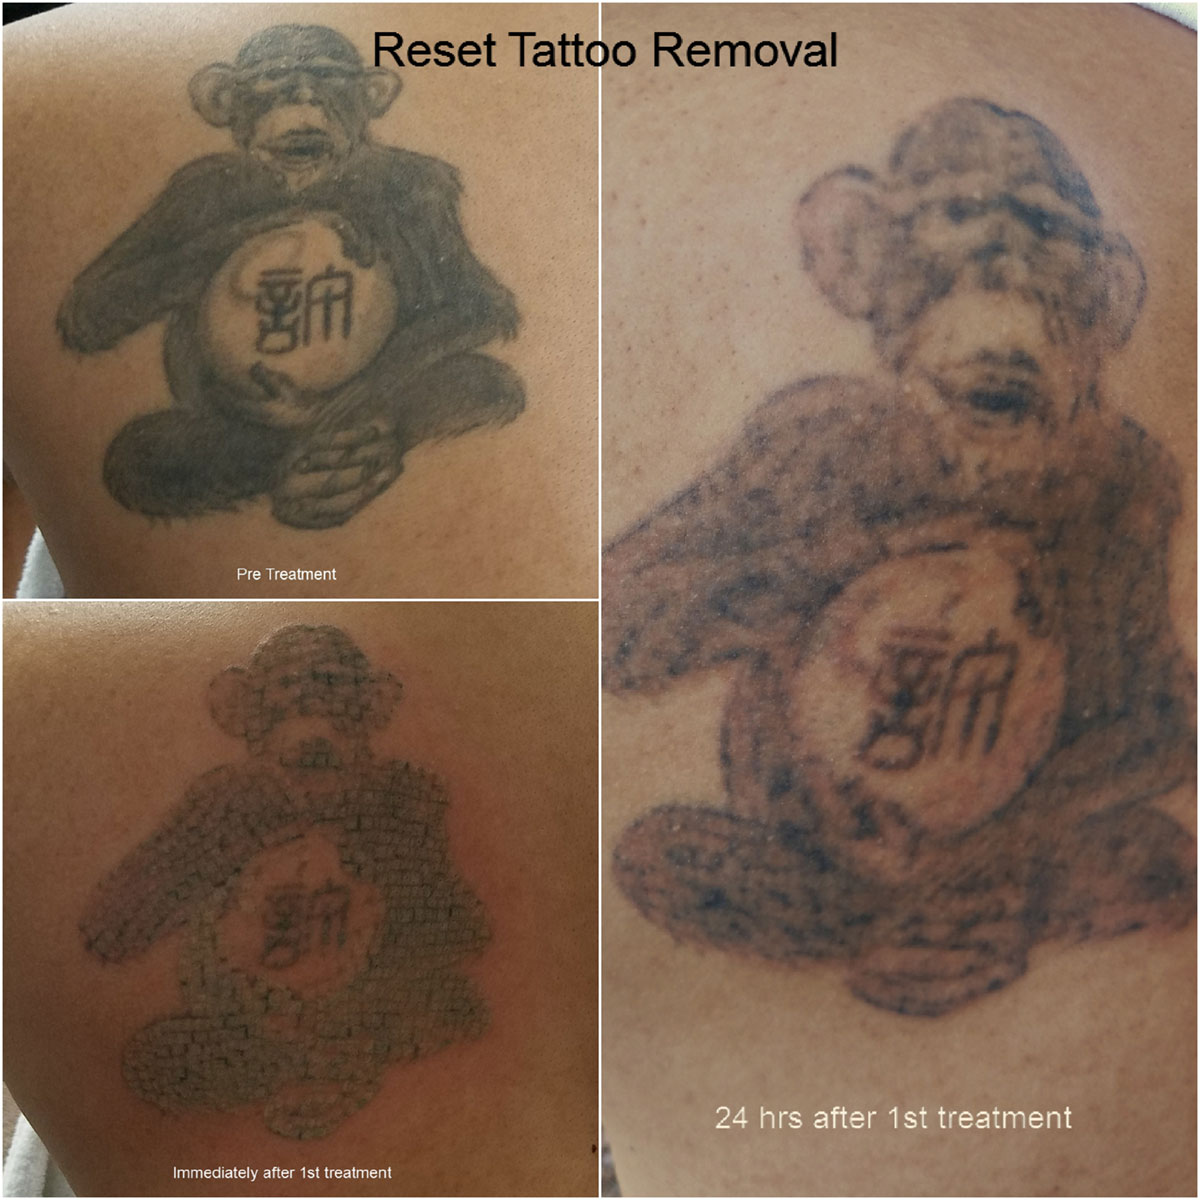 Reset Tattoo Removal – Tattoo Removal Solution